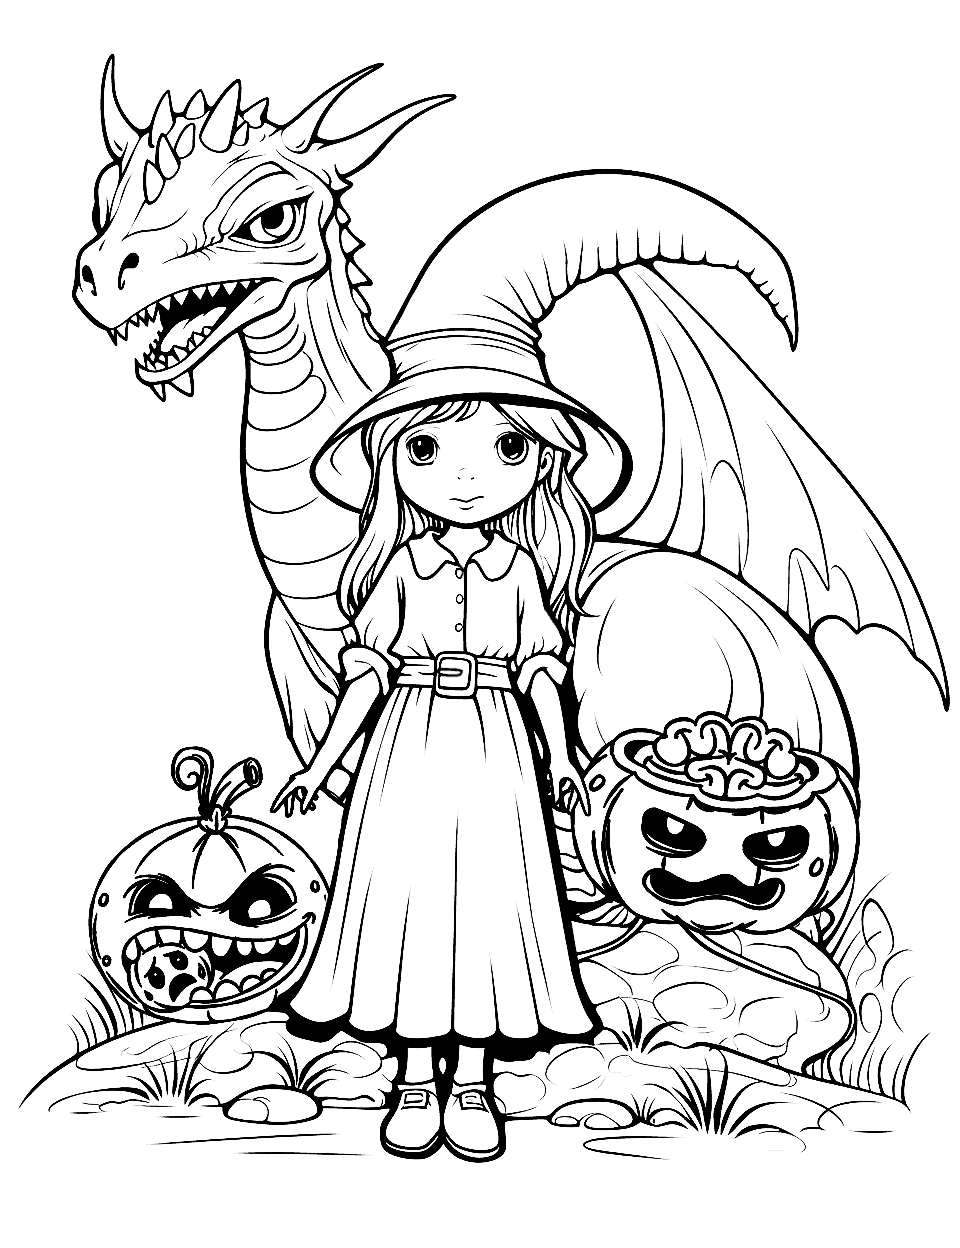 Witch and Her Dragon Coloring Page - A witch standing beside a small, protective dragon.